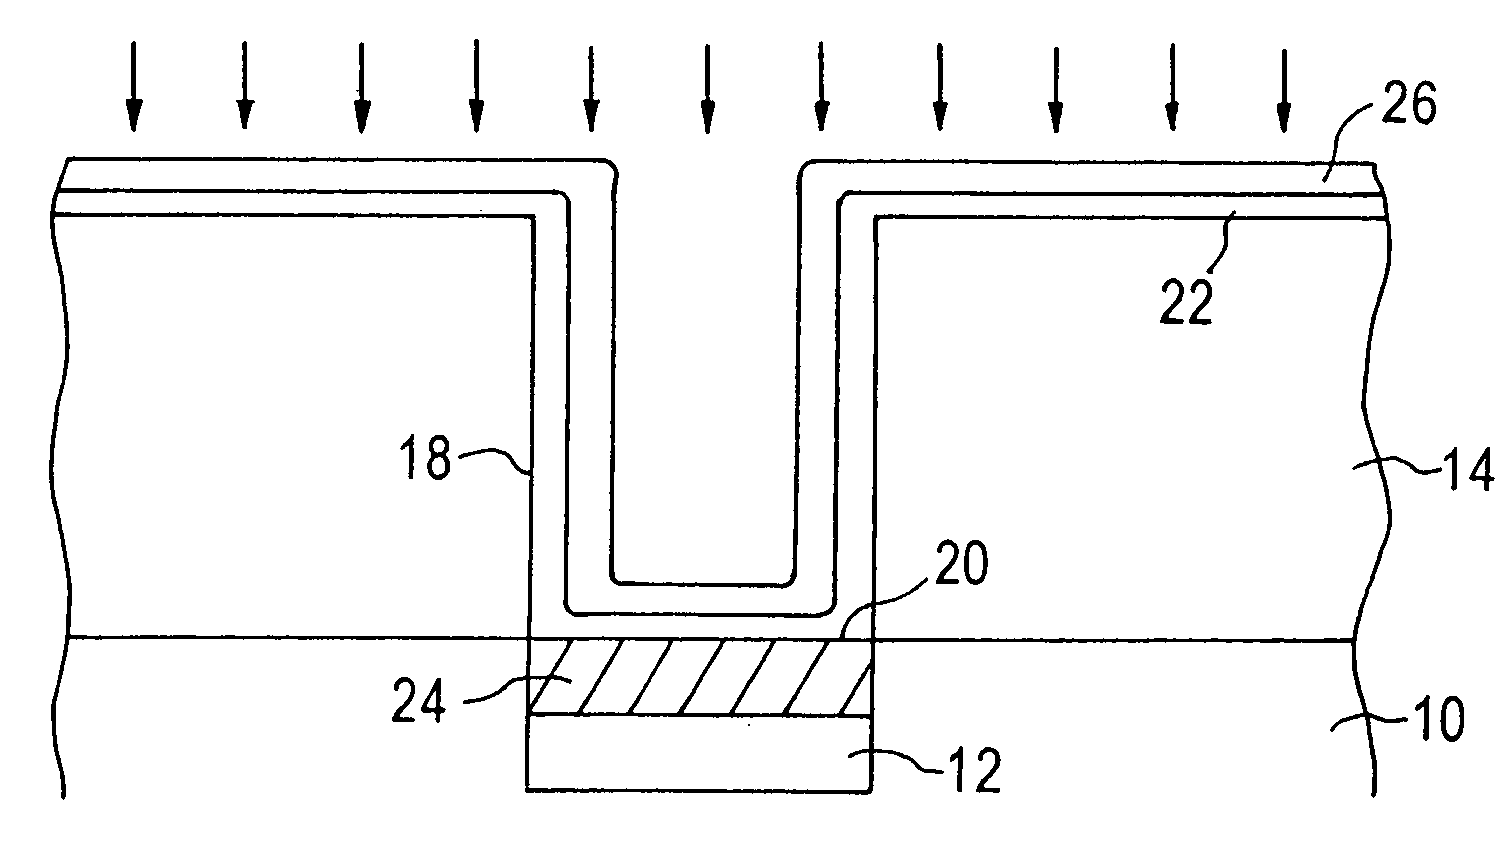 Method of forming a contact in a semiconductor device with formation of silicide prior to plasma treatment